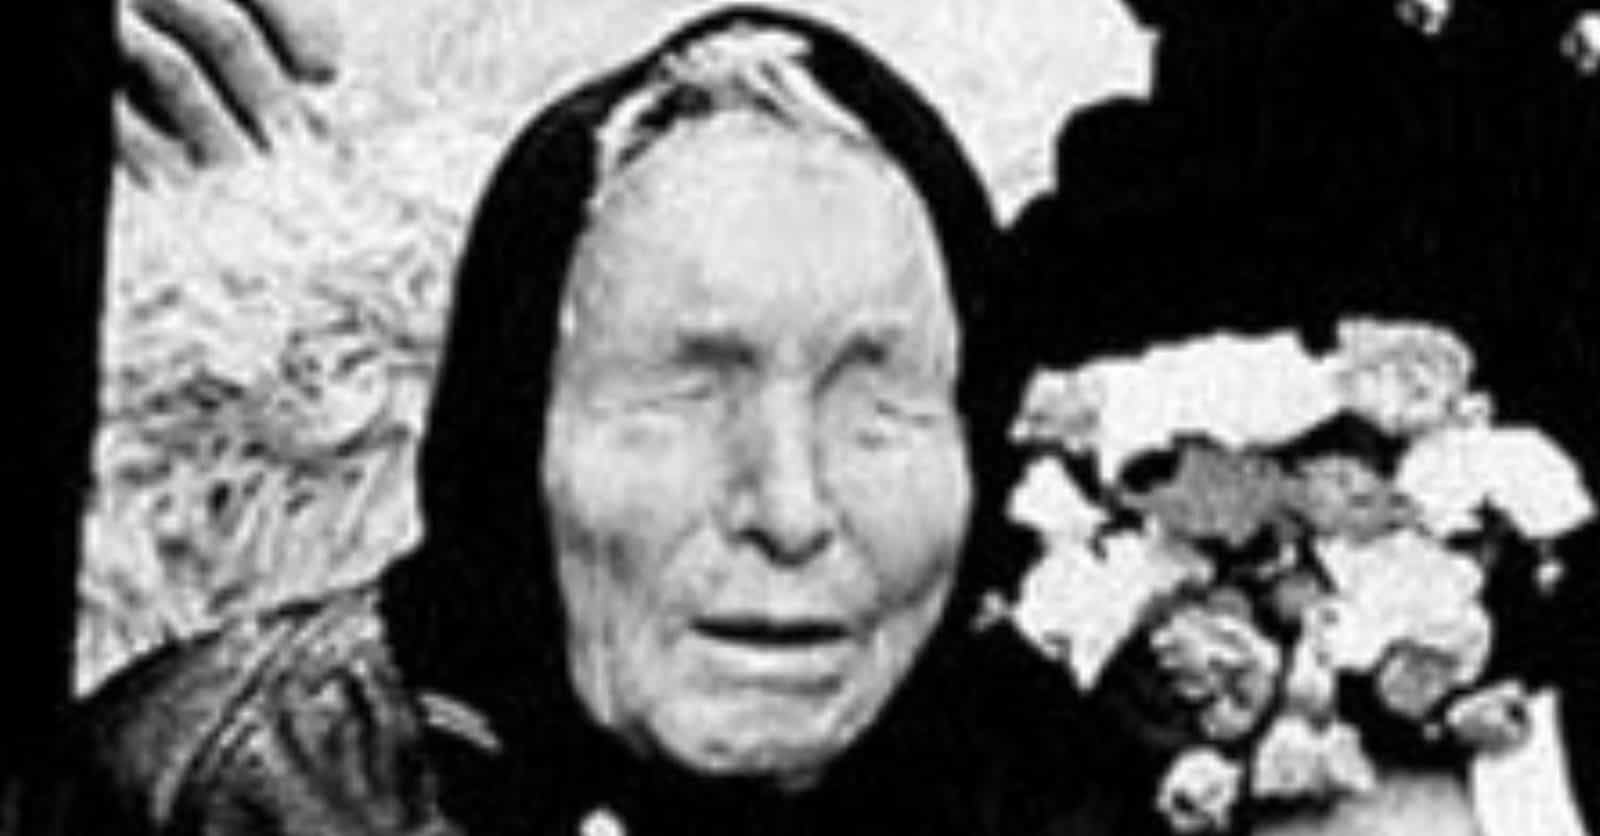 Baba Vanga Is The Blind Clairvoyant Freaking Out People With Her Eerily Accurate Predictions